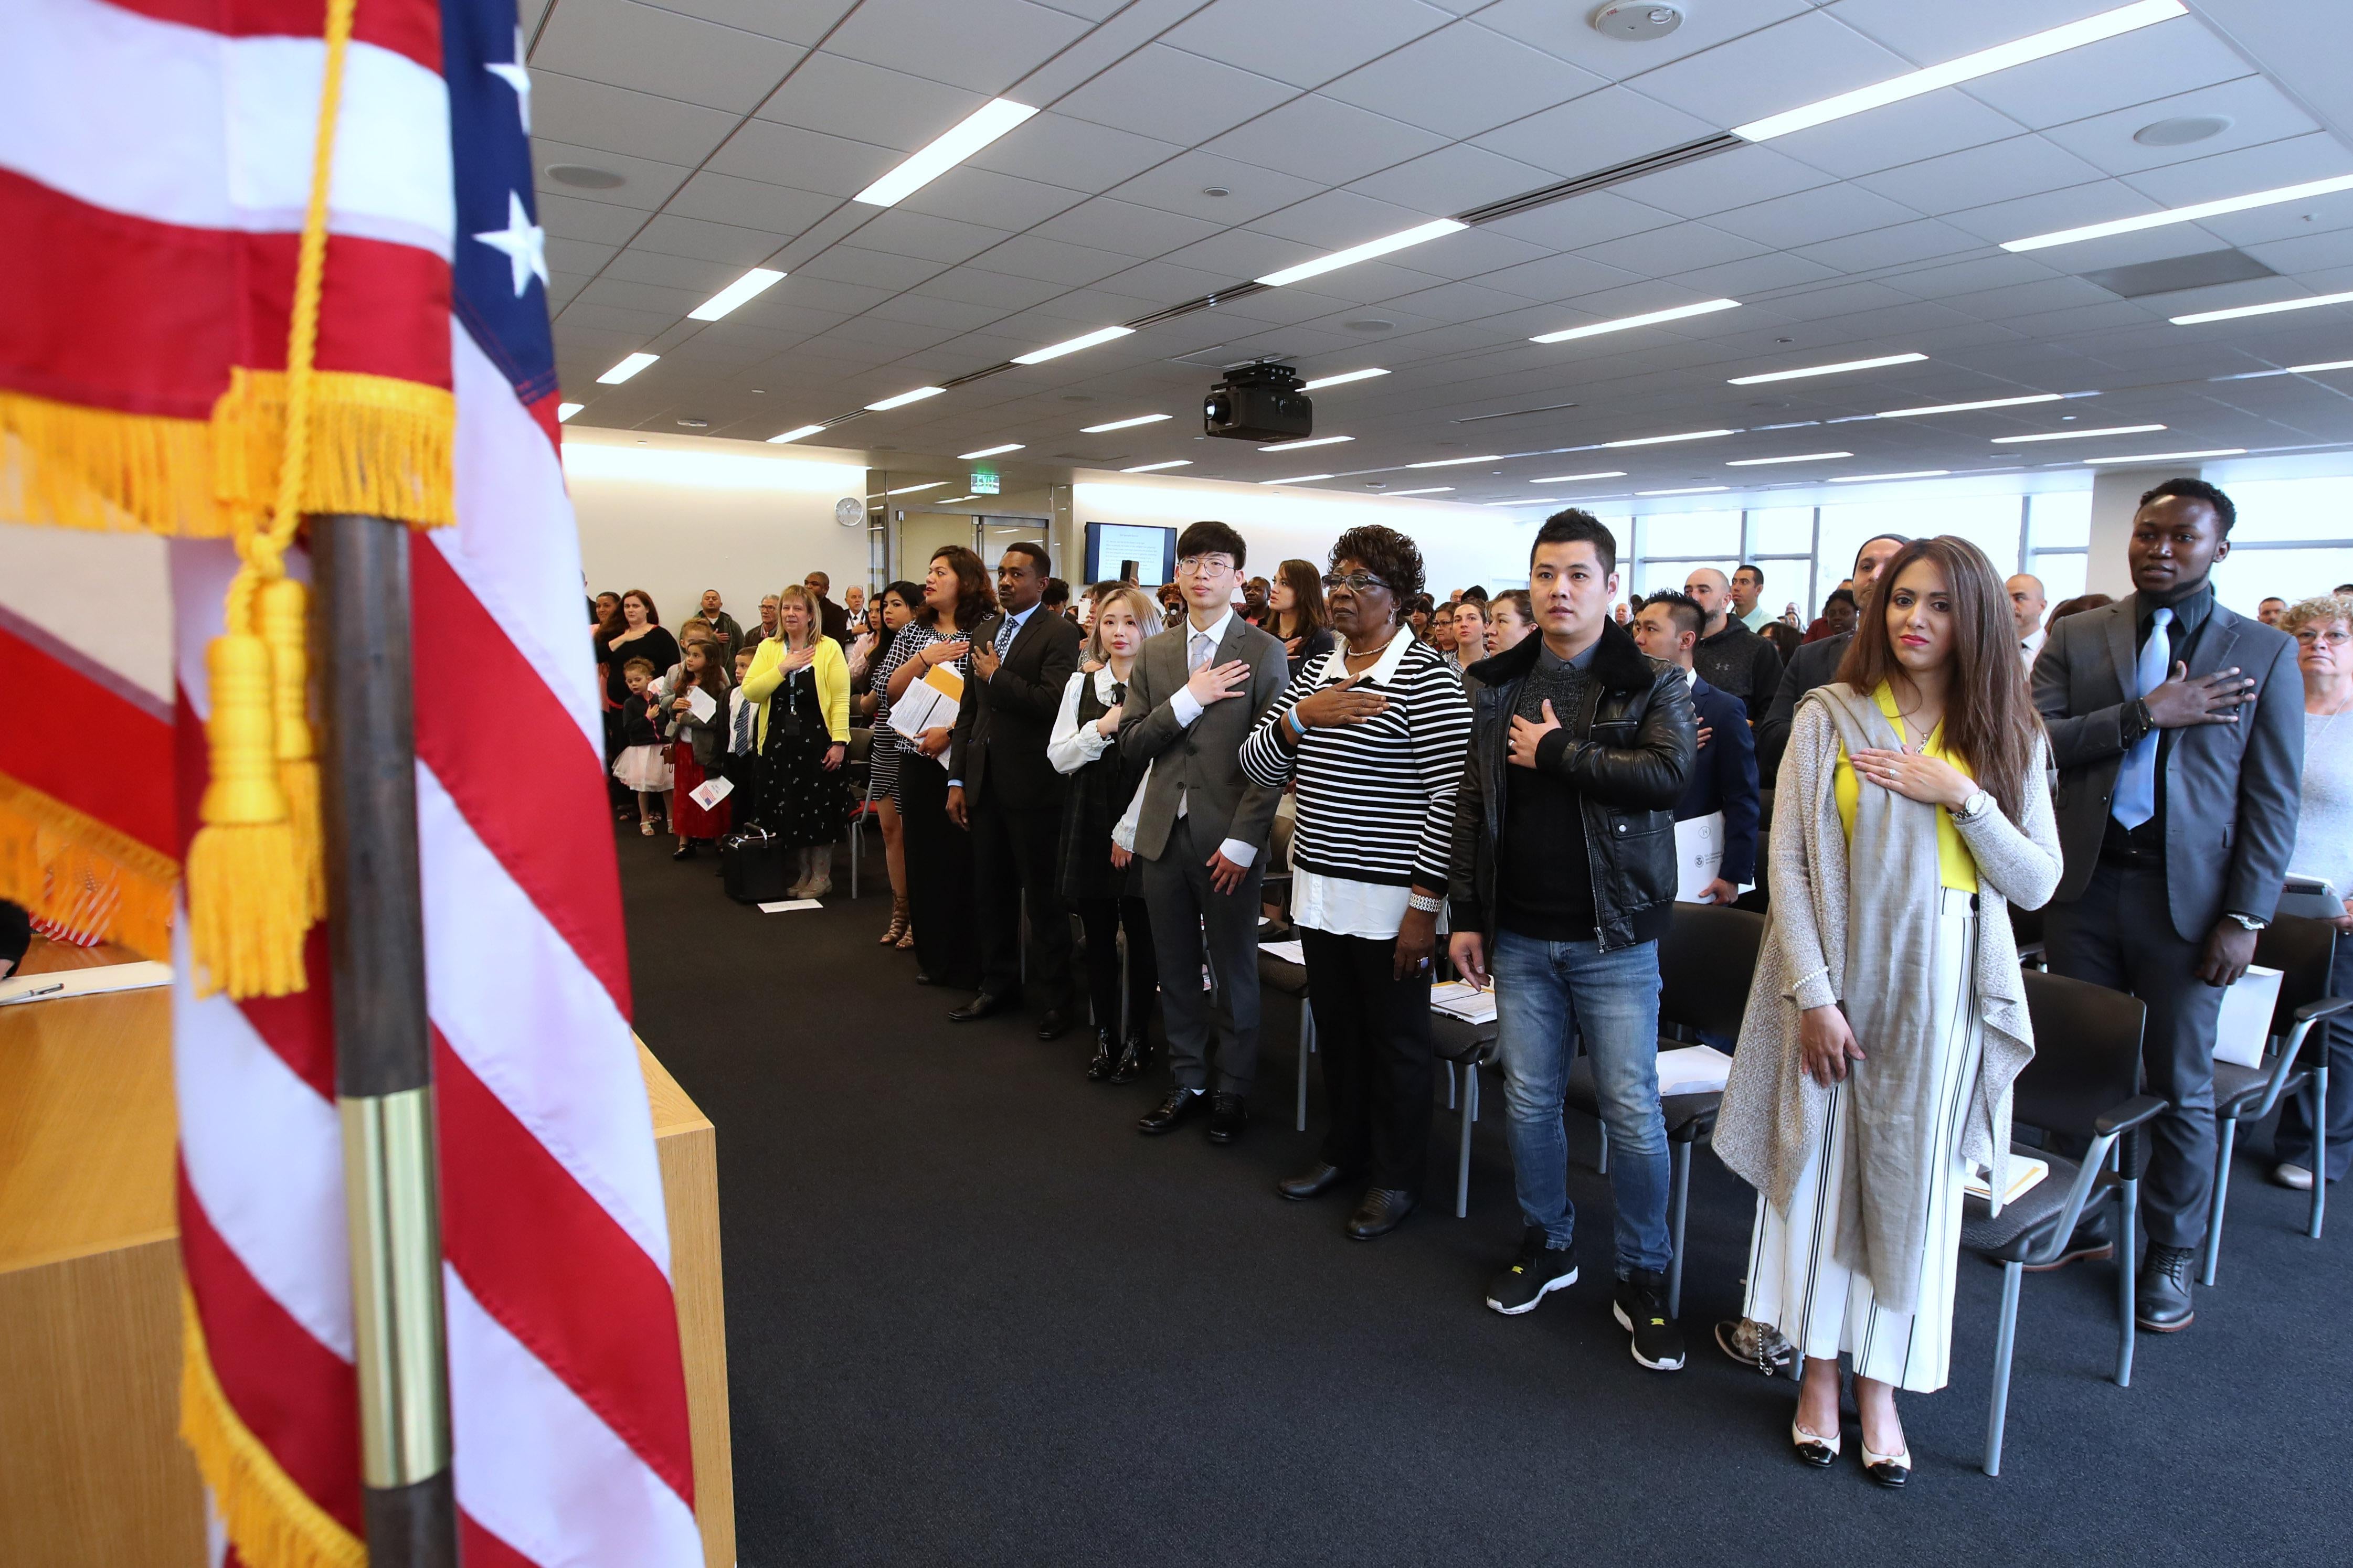 Soon-to-be U.S. citizens at a naturalization ceremony. American Samoans, though born in the United States, must apply for citizenship.